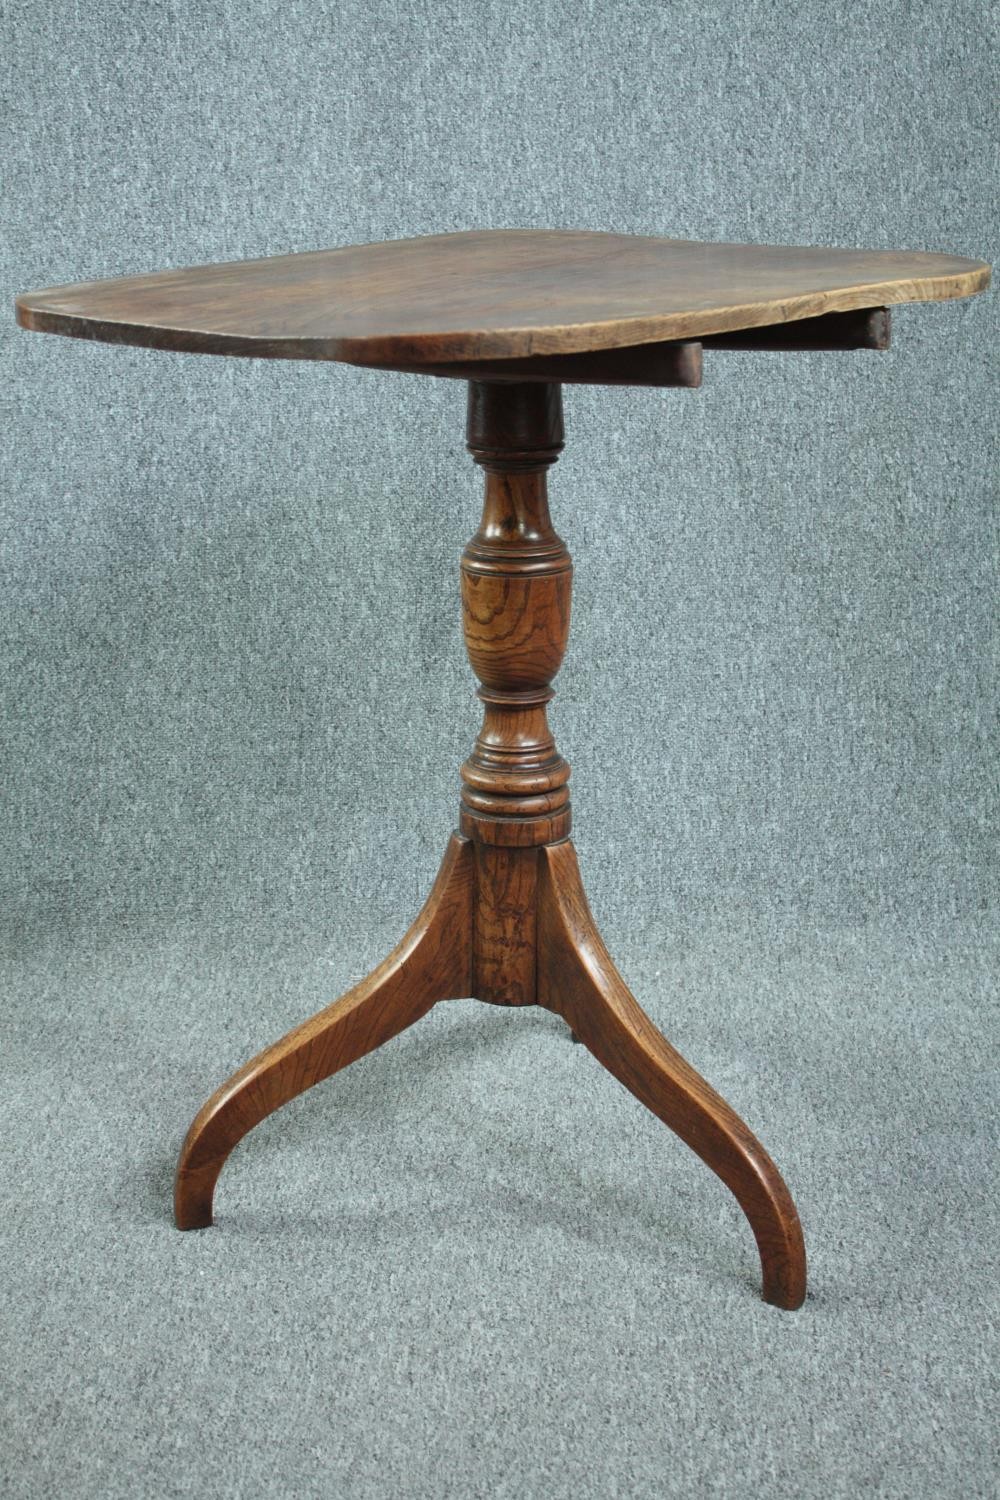 Occasional table, early 19th century mahogany with tilt top action. H.76 W.64 D.54cm. - Image 3 of 5